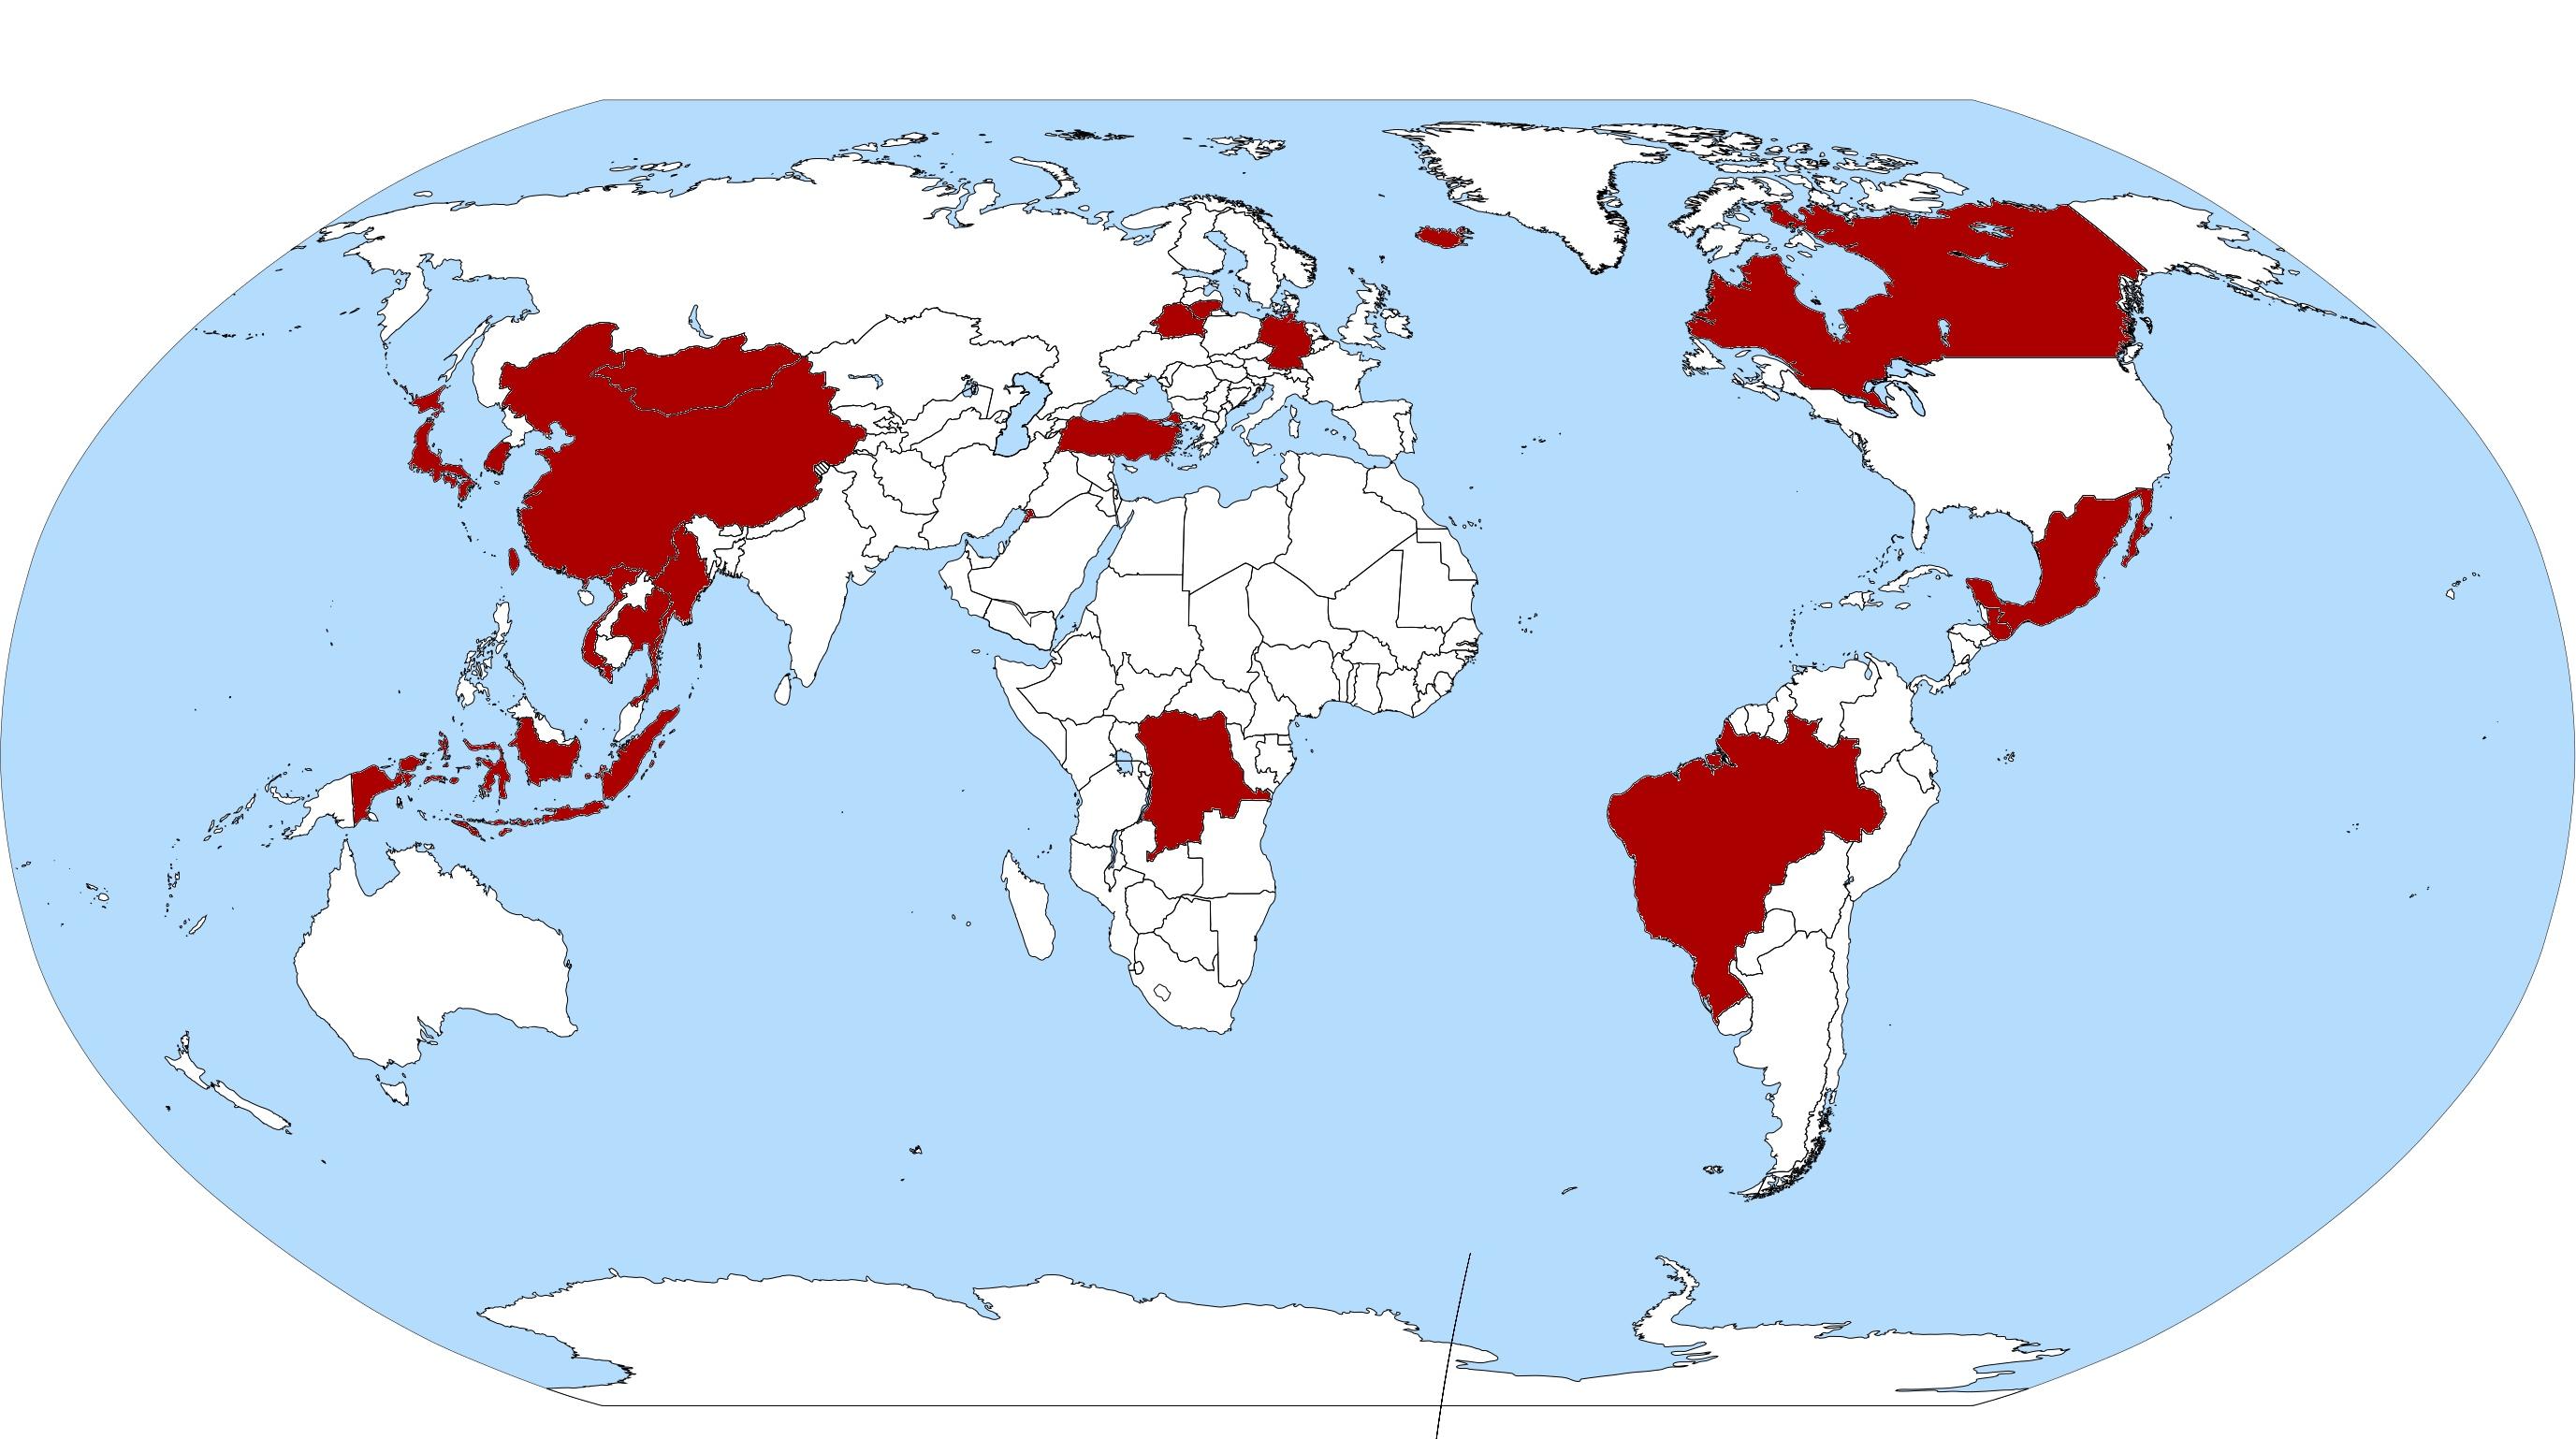 A map of the origin countries of the ELCB students for the past academic years: Belarus, Brazil, Canada, China, Congo, Germany, Guatemala, Hong Kong, Iceland, Indonesia, Japan, Kuwait, Lithuania, Mexico, Mongolia, Myanmar, South Korea, Taiwan, Thailand, Turkey, Vietnam